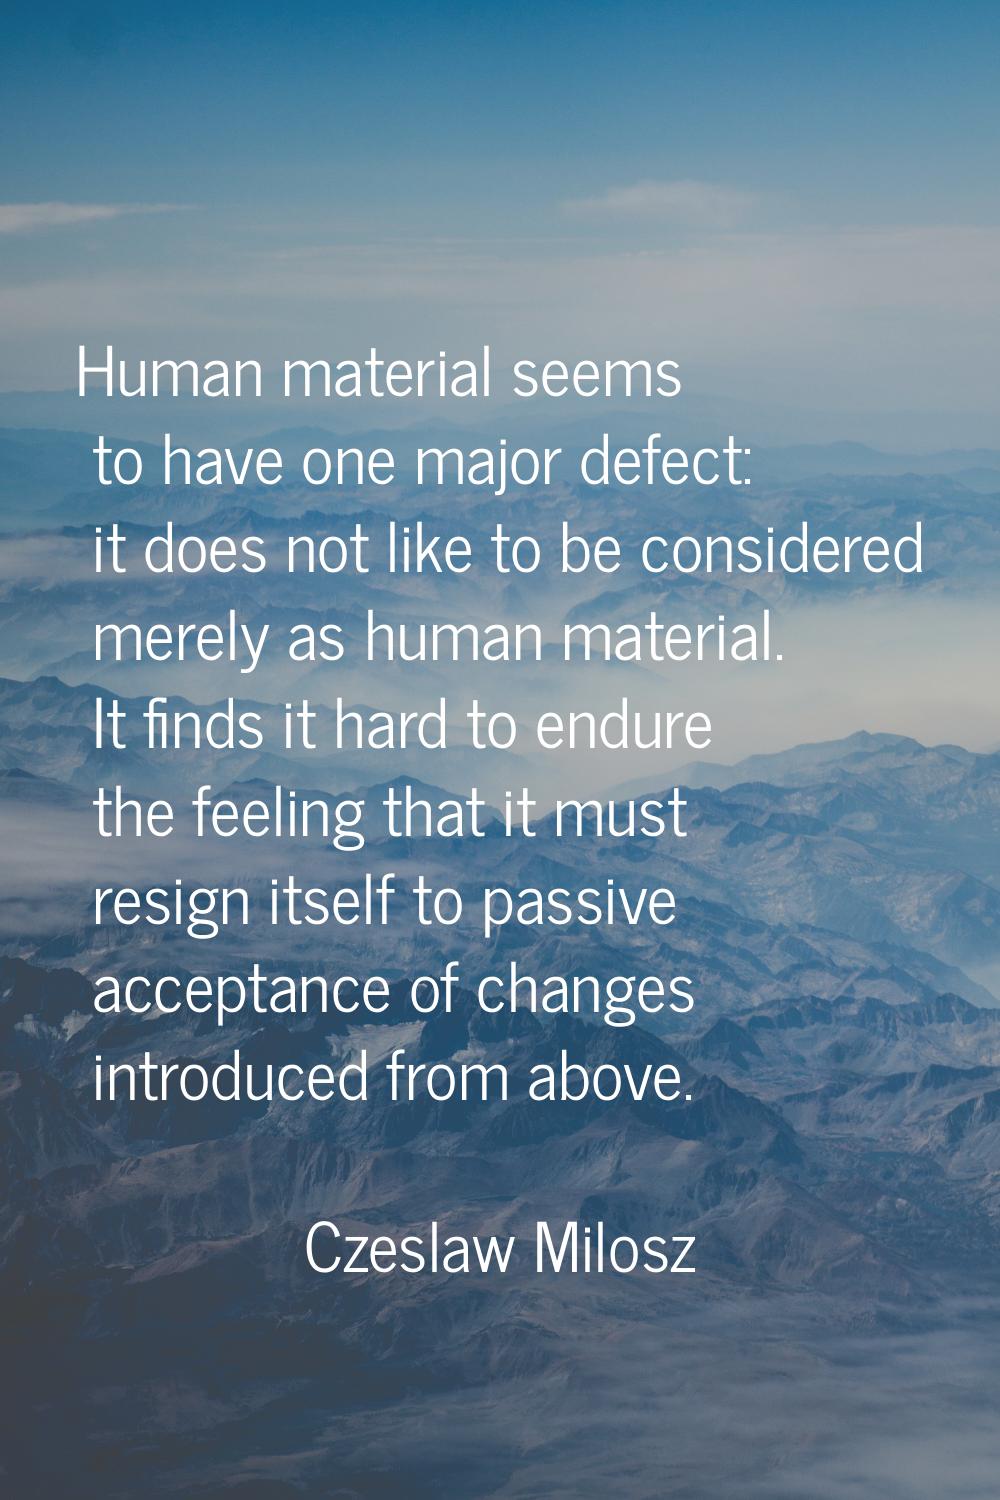 Human material seems to have one major defect: it does not like to be considered merely as human ma